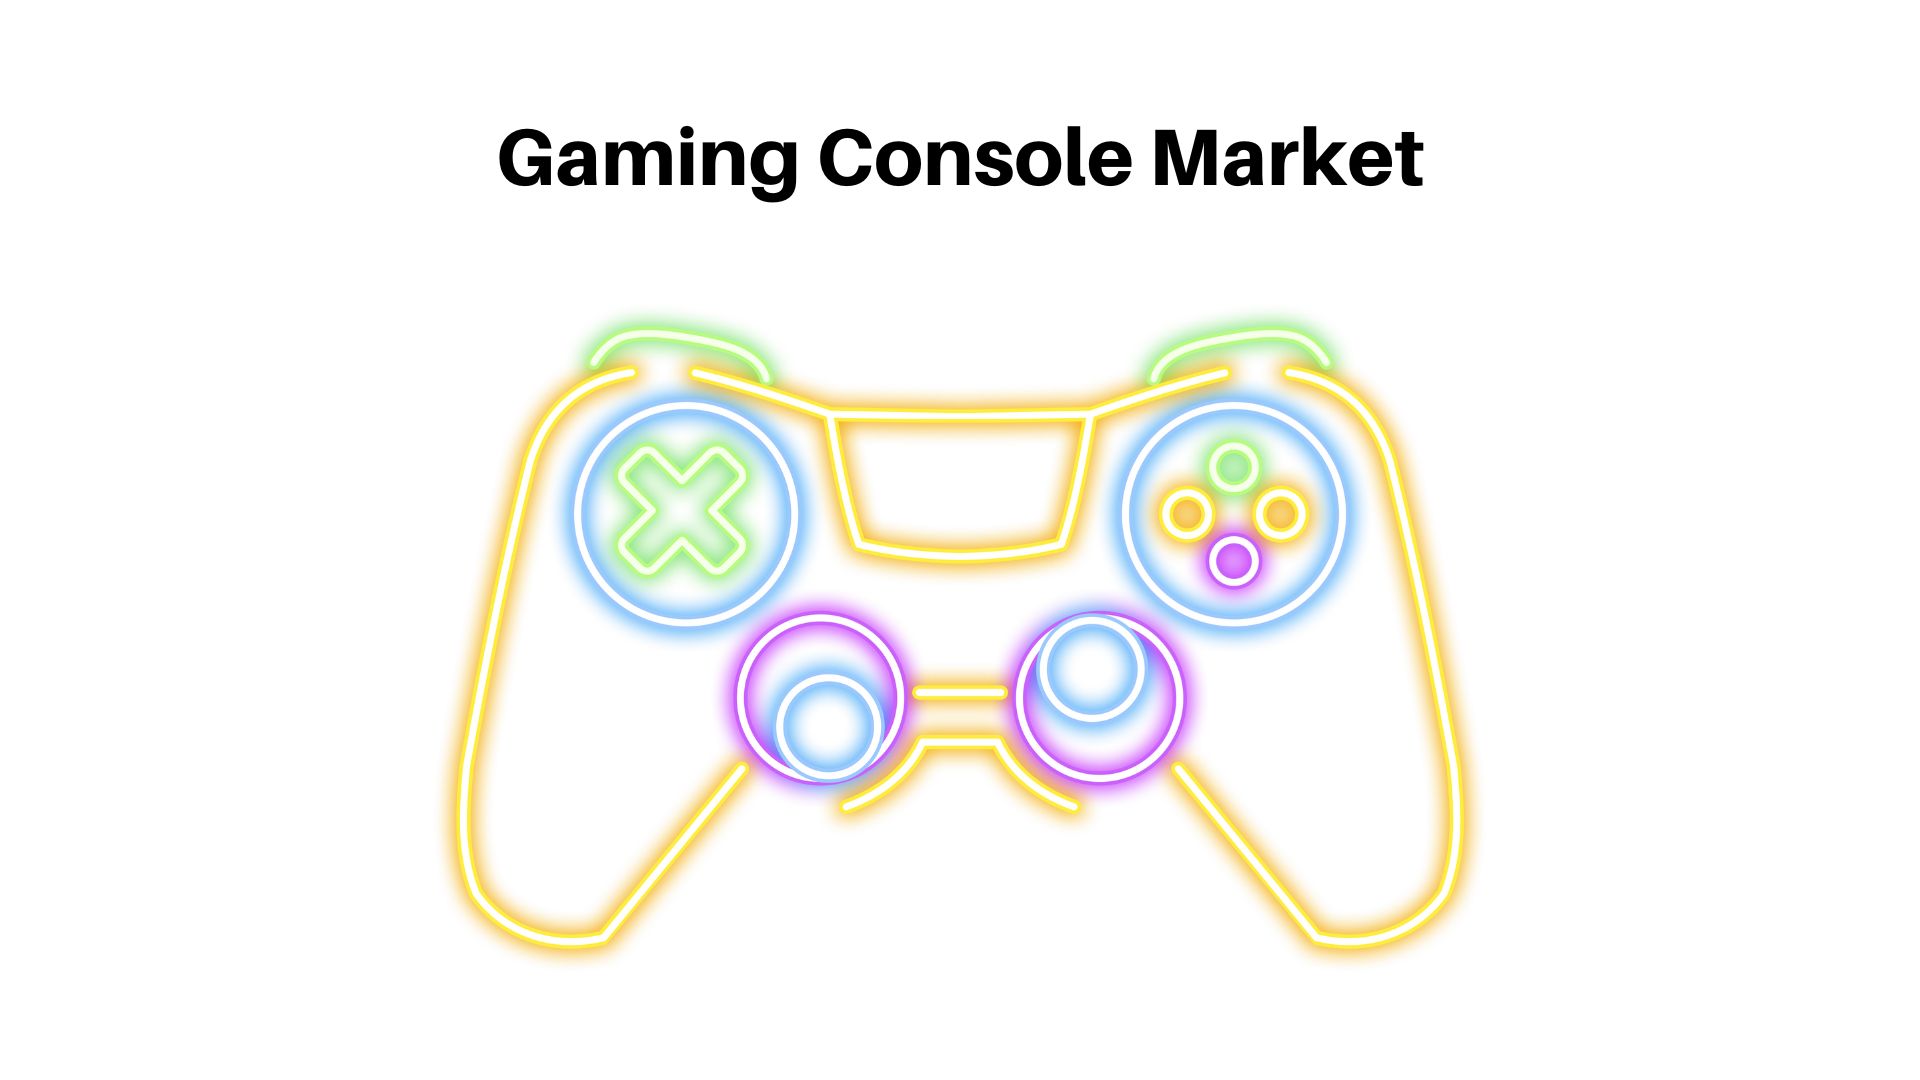 Gaming Console Market Growth 7.2% | SWOT analysis up to 2032